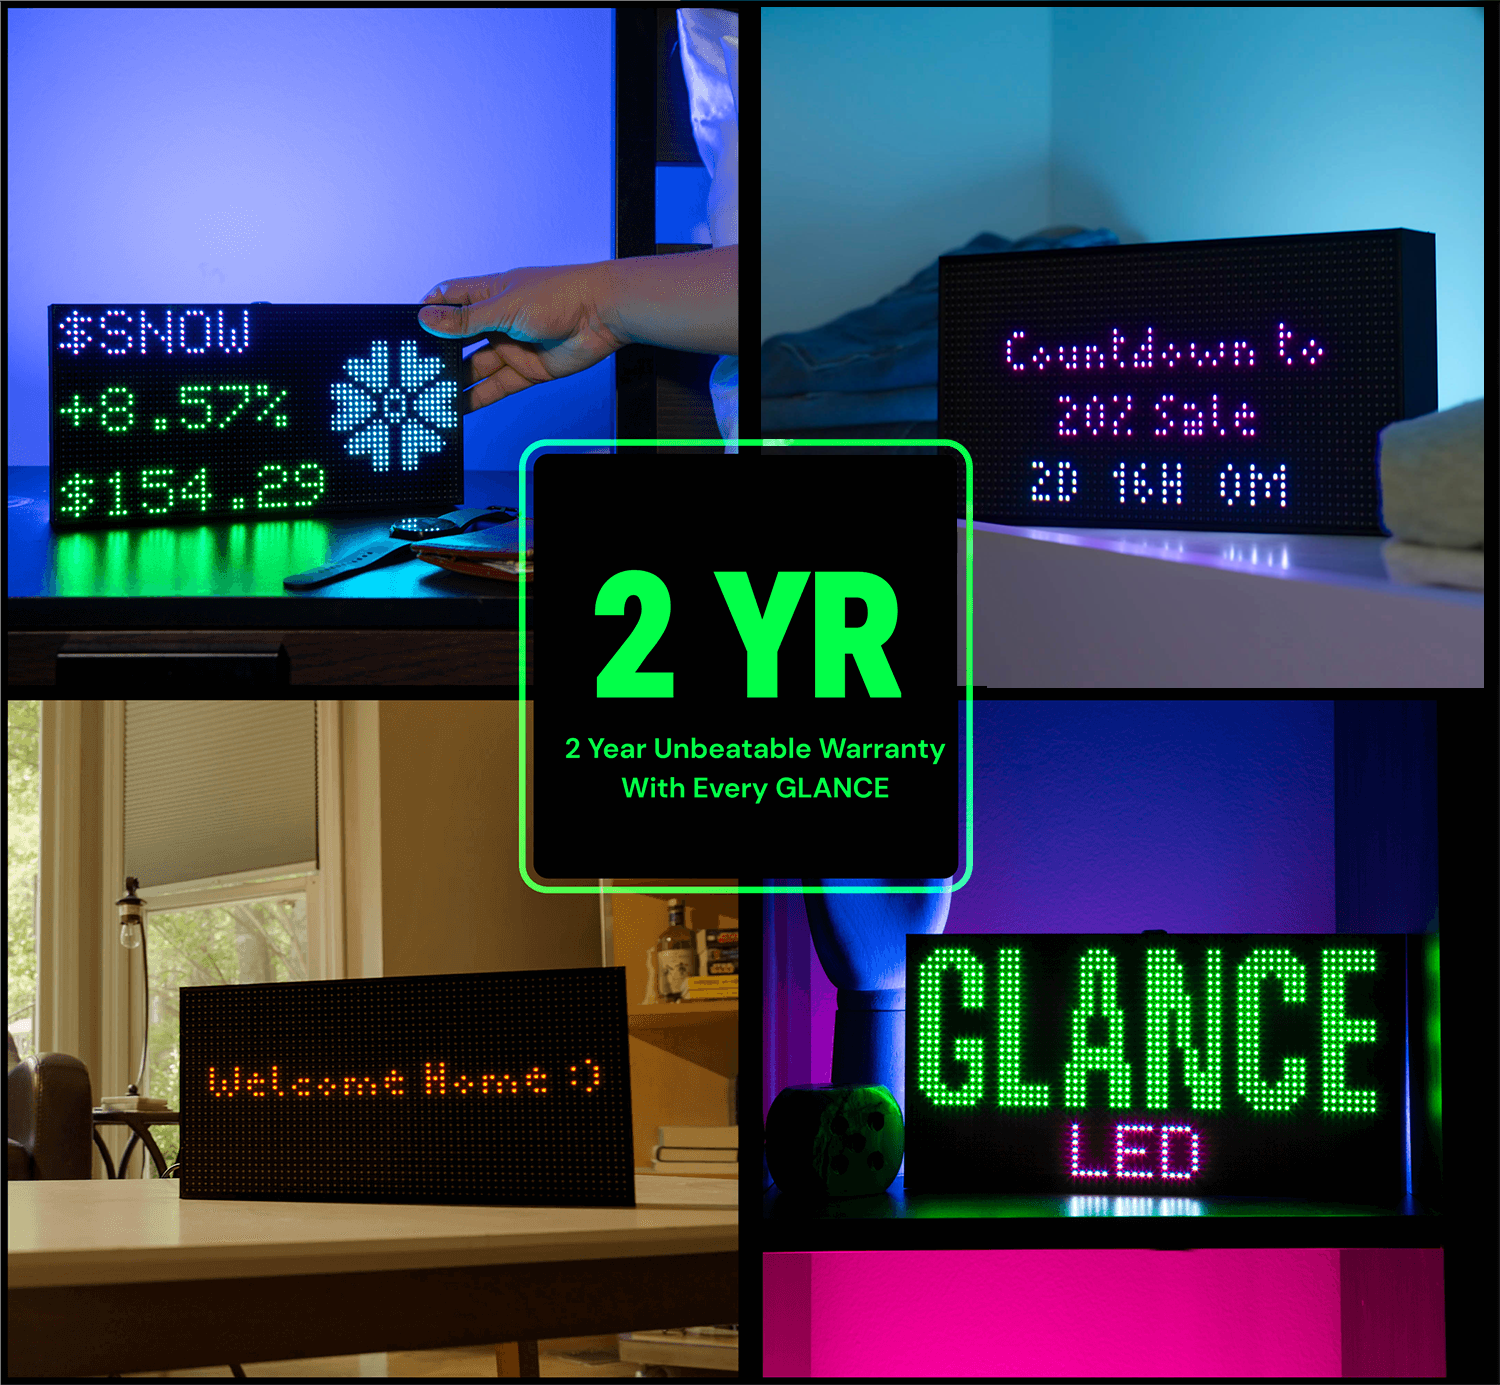 Collage of LED displays with different messages and a highlighted '2 Year Unbeatable Warranty' note.